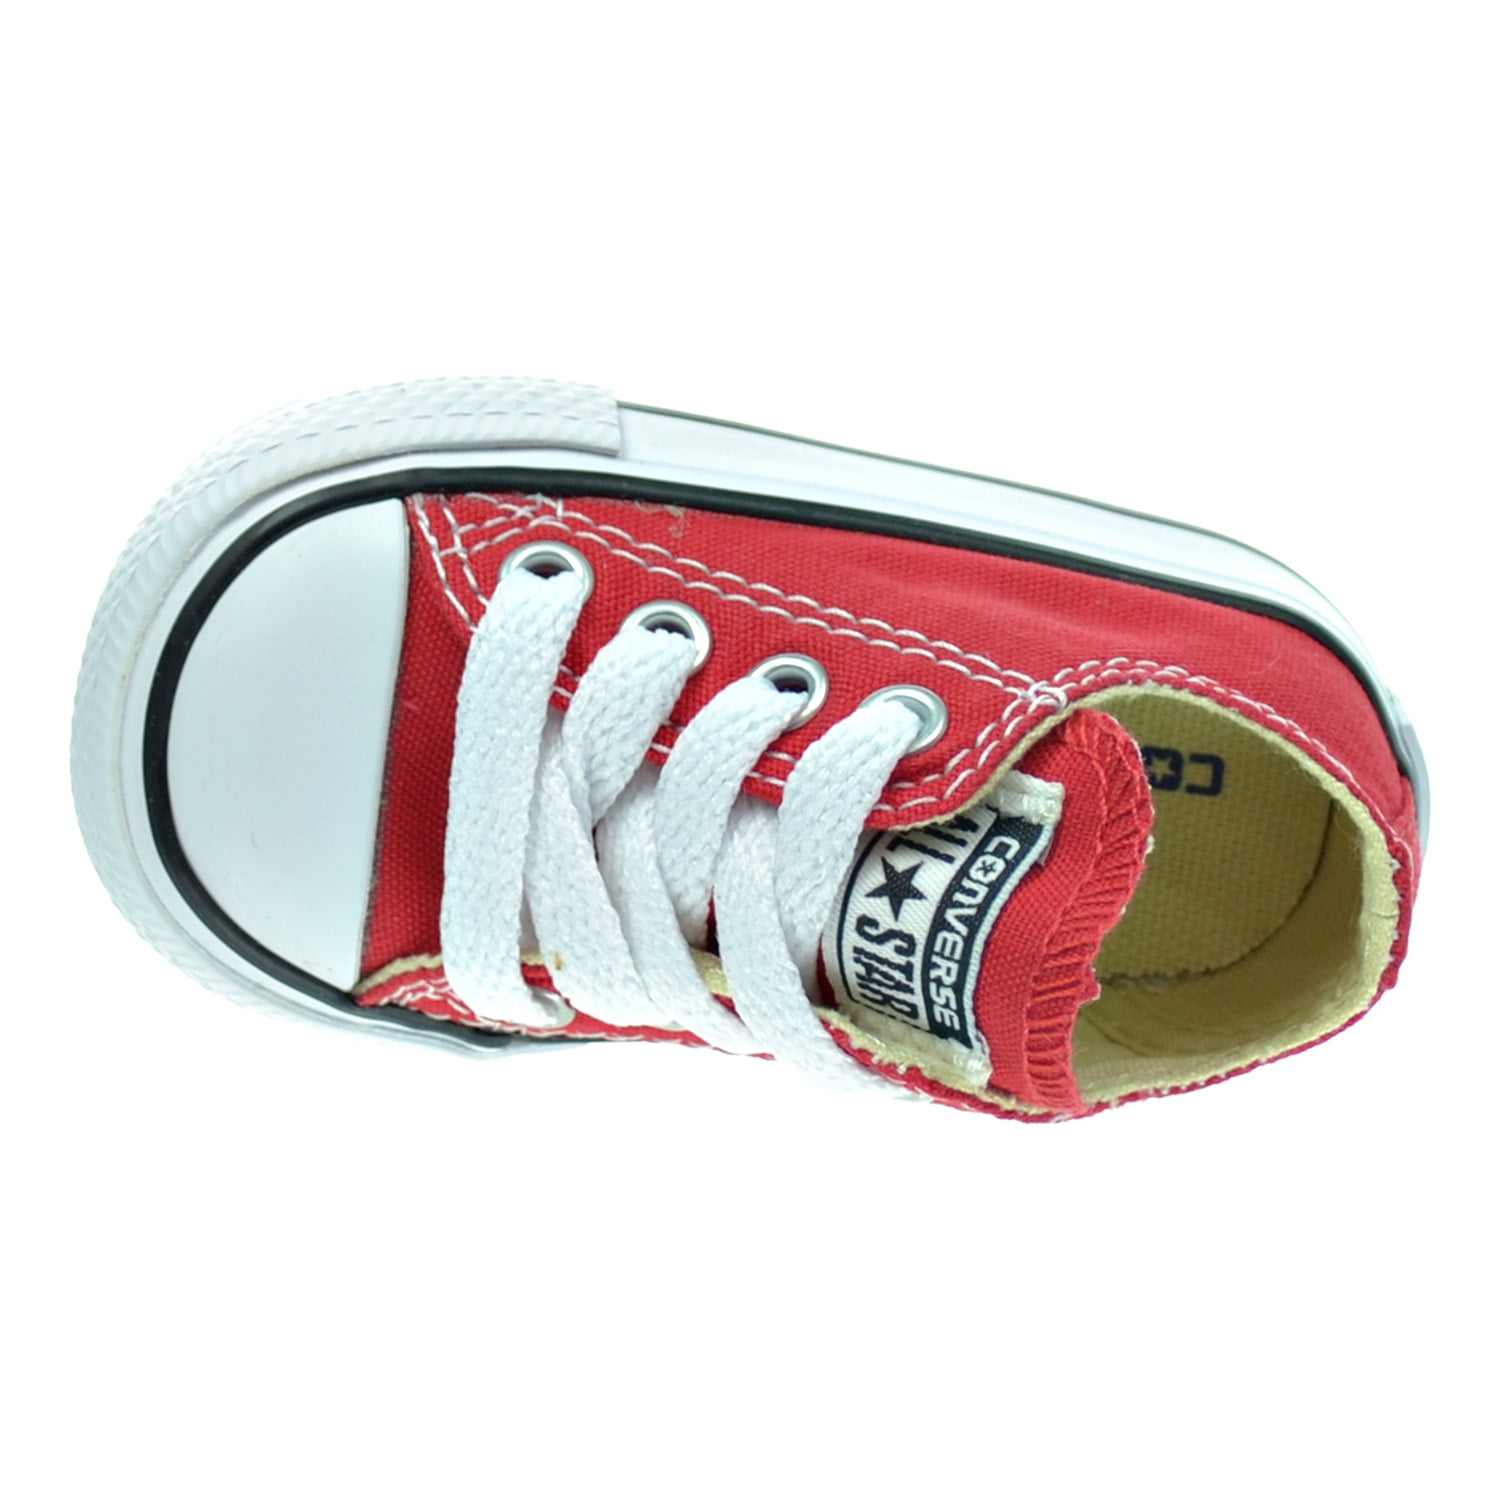 Nathaniel Ward Minefelt Påstand Converse Chuck Taylor All Star Low Top Infants/Toddlers Shoes Red 7j236 -  Walmart.com